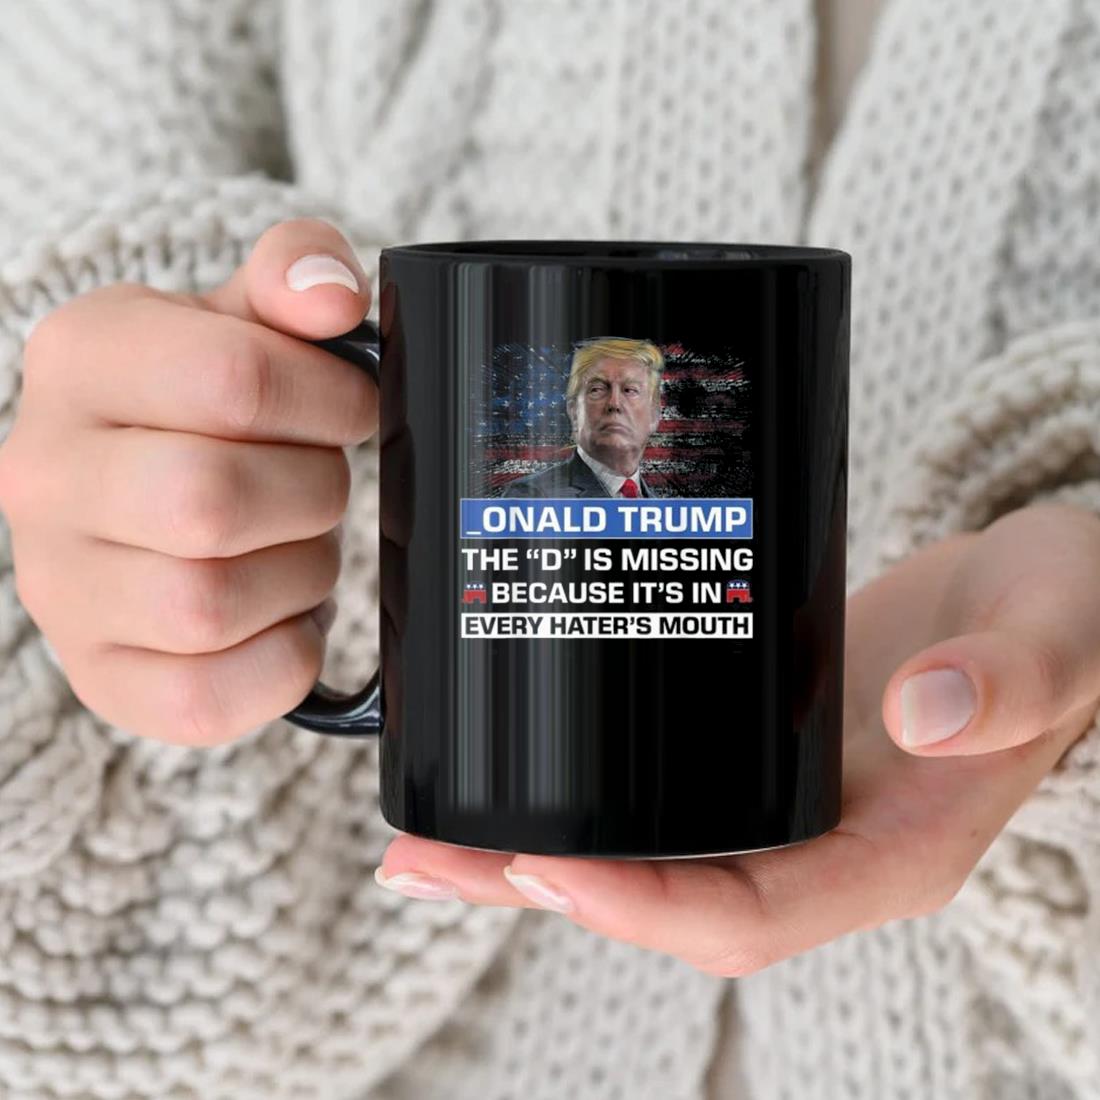 _onald Trump The D Is Missing Because It's In Every Hater's Mouth Mug